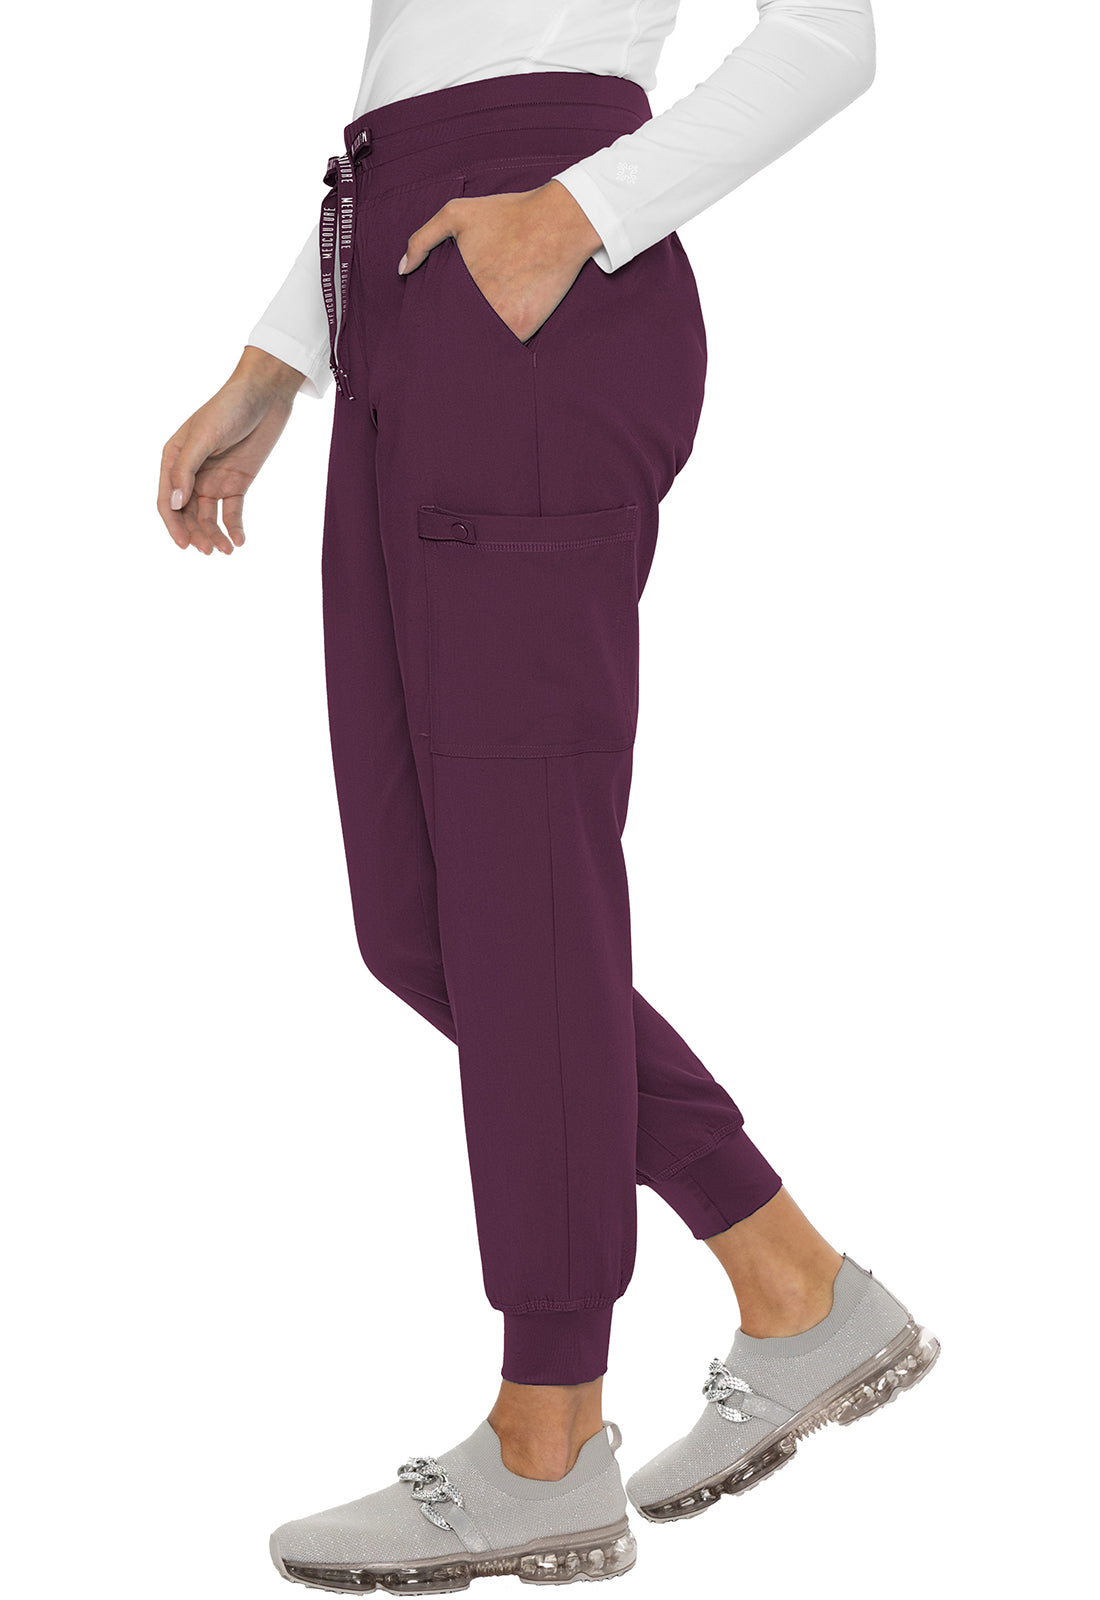 Med Couture Touch 7705 Women's Double Cargo Jogger Pant Wine Side